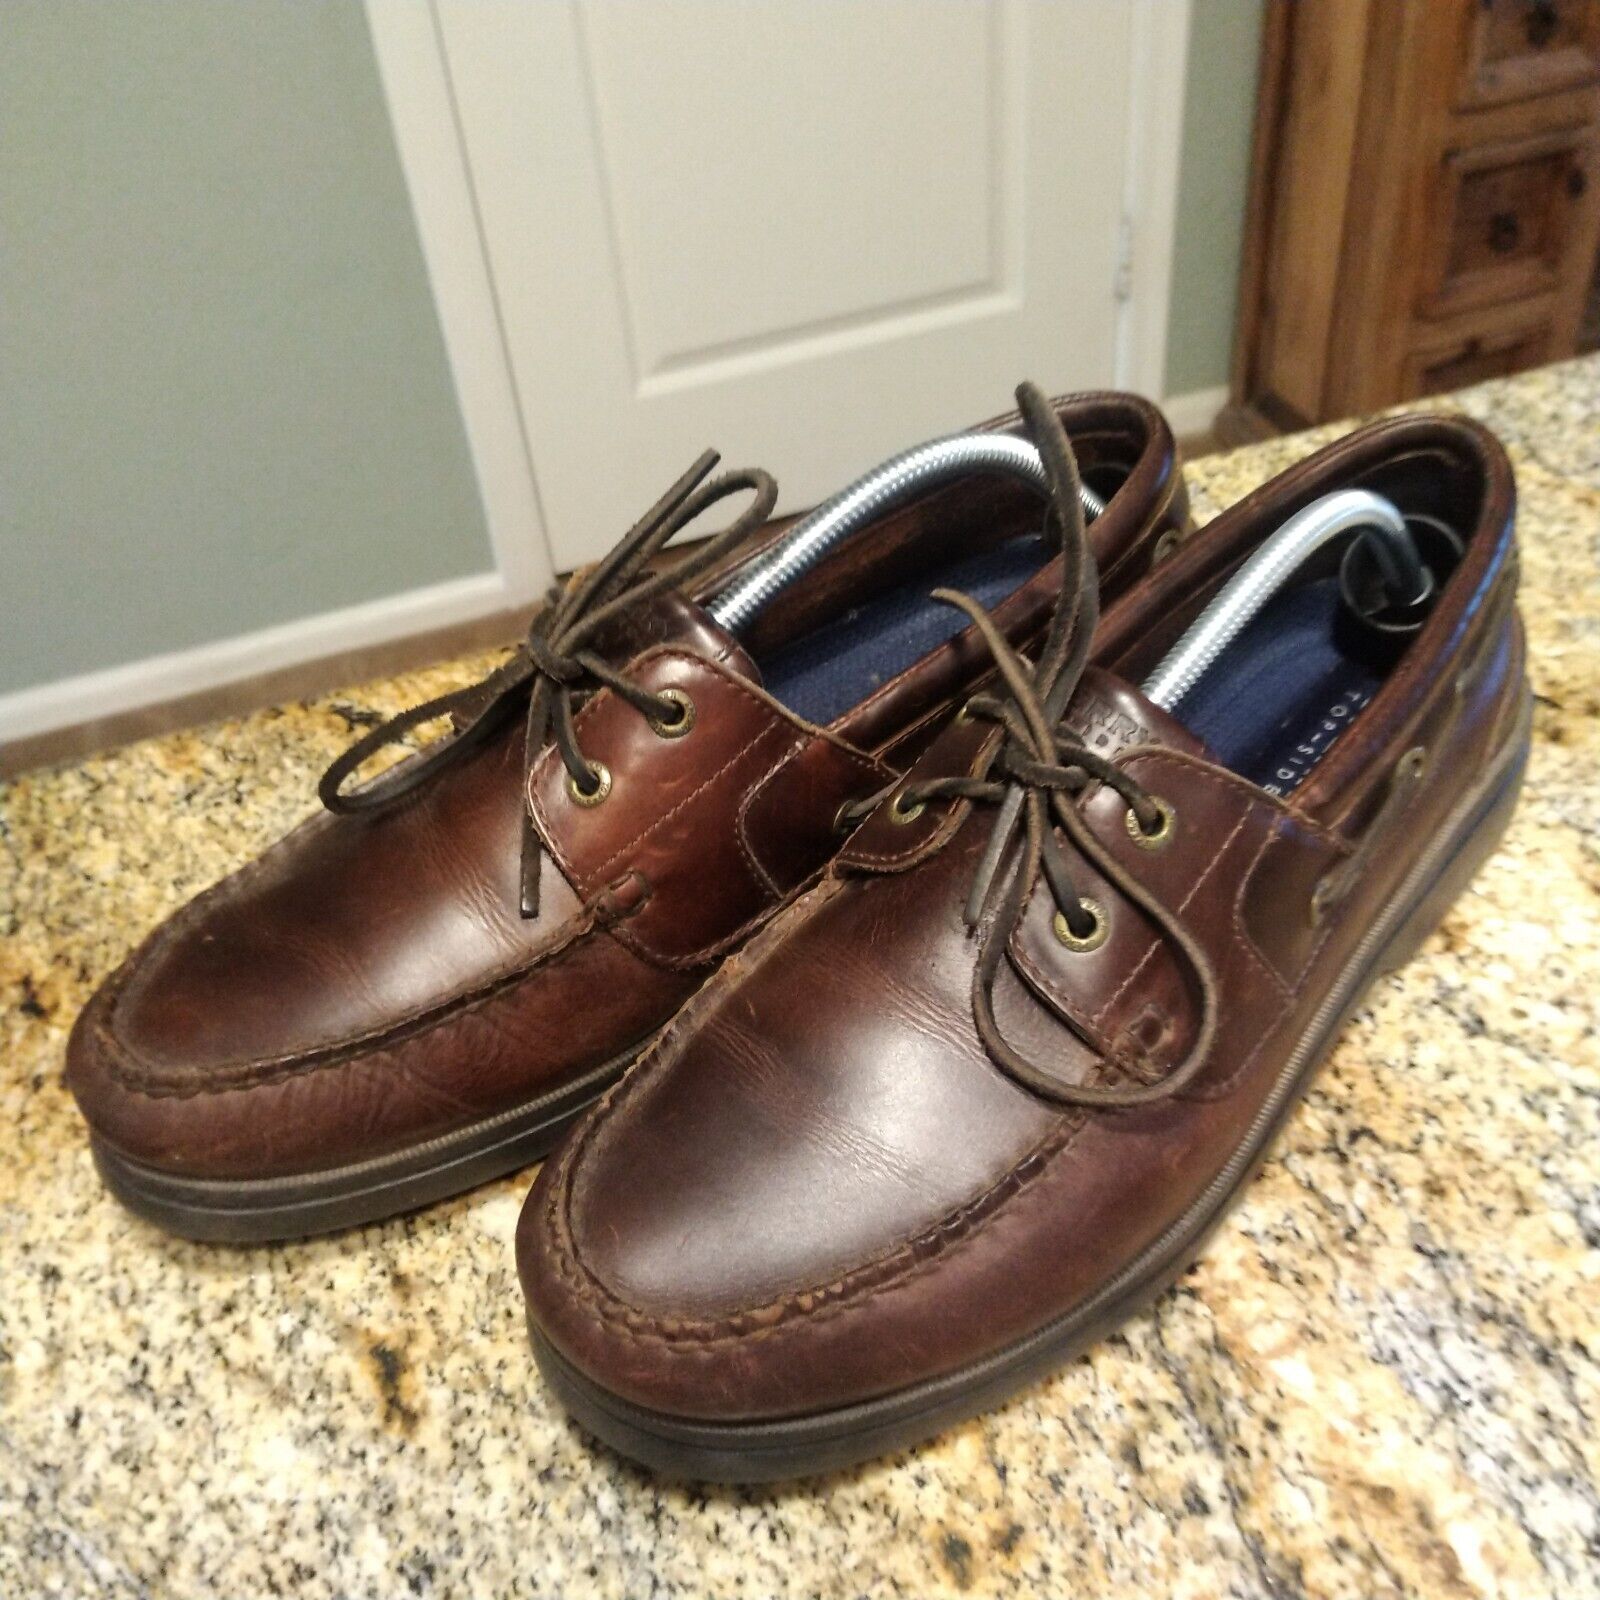 Primary image for Sperry Top-Sider G-1  Men’s Brown Leather Laced Boat Shoes Size 12M - 0196188